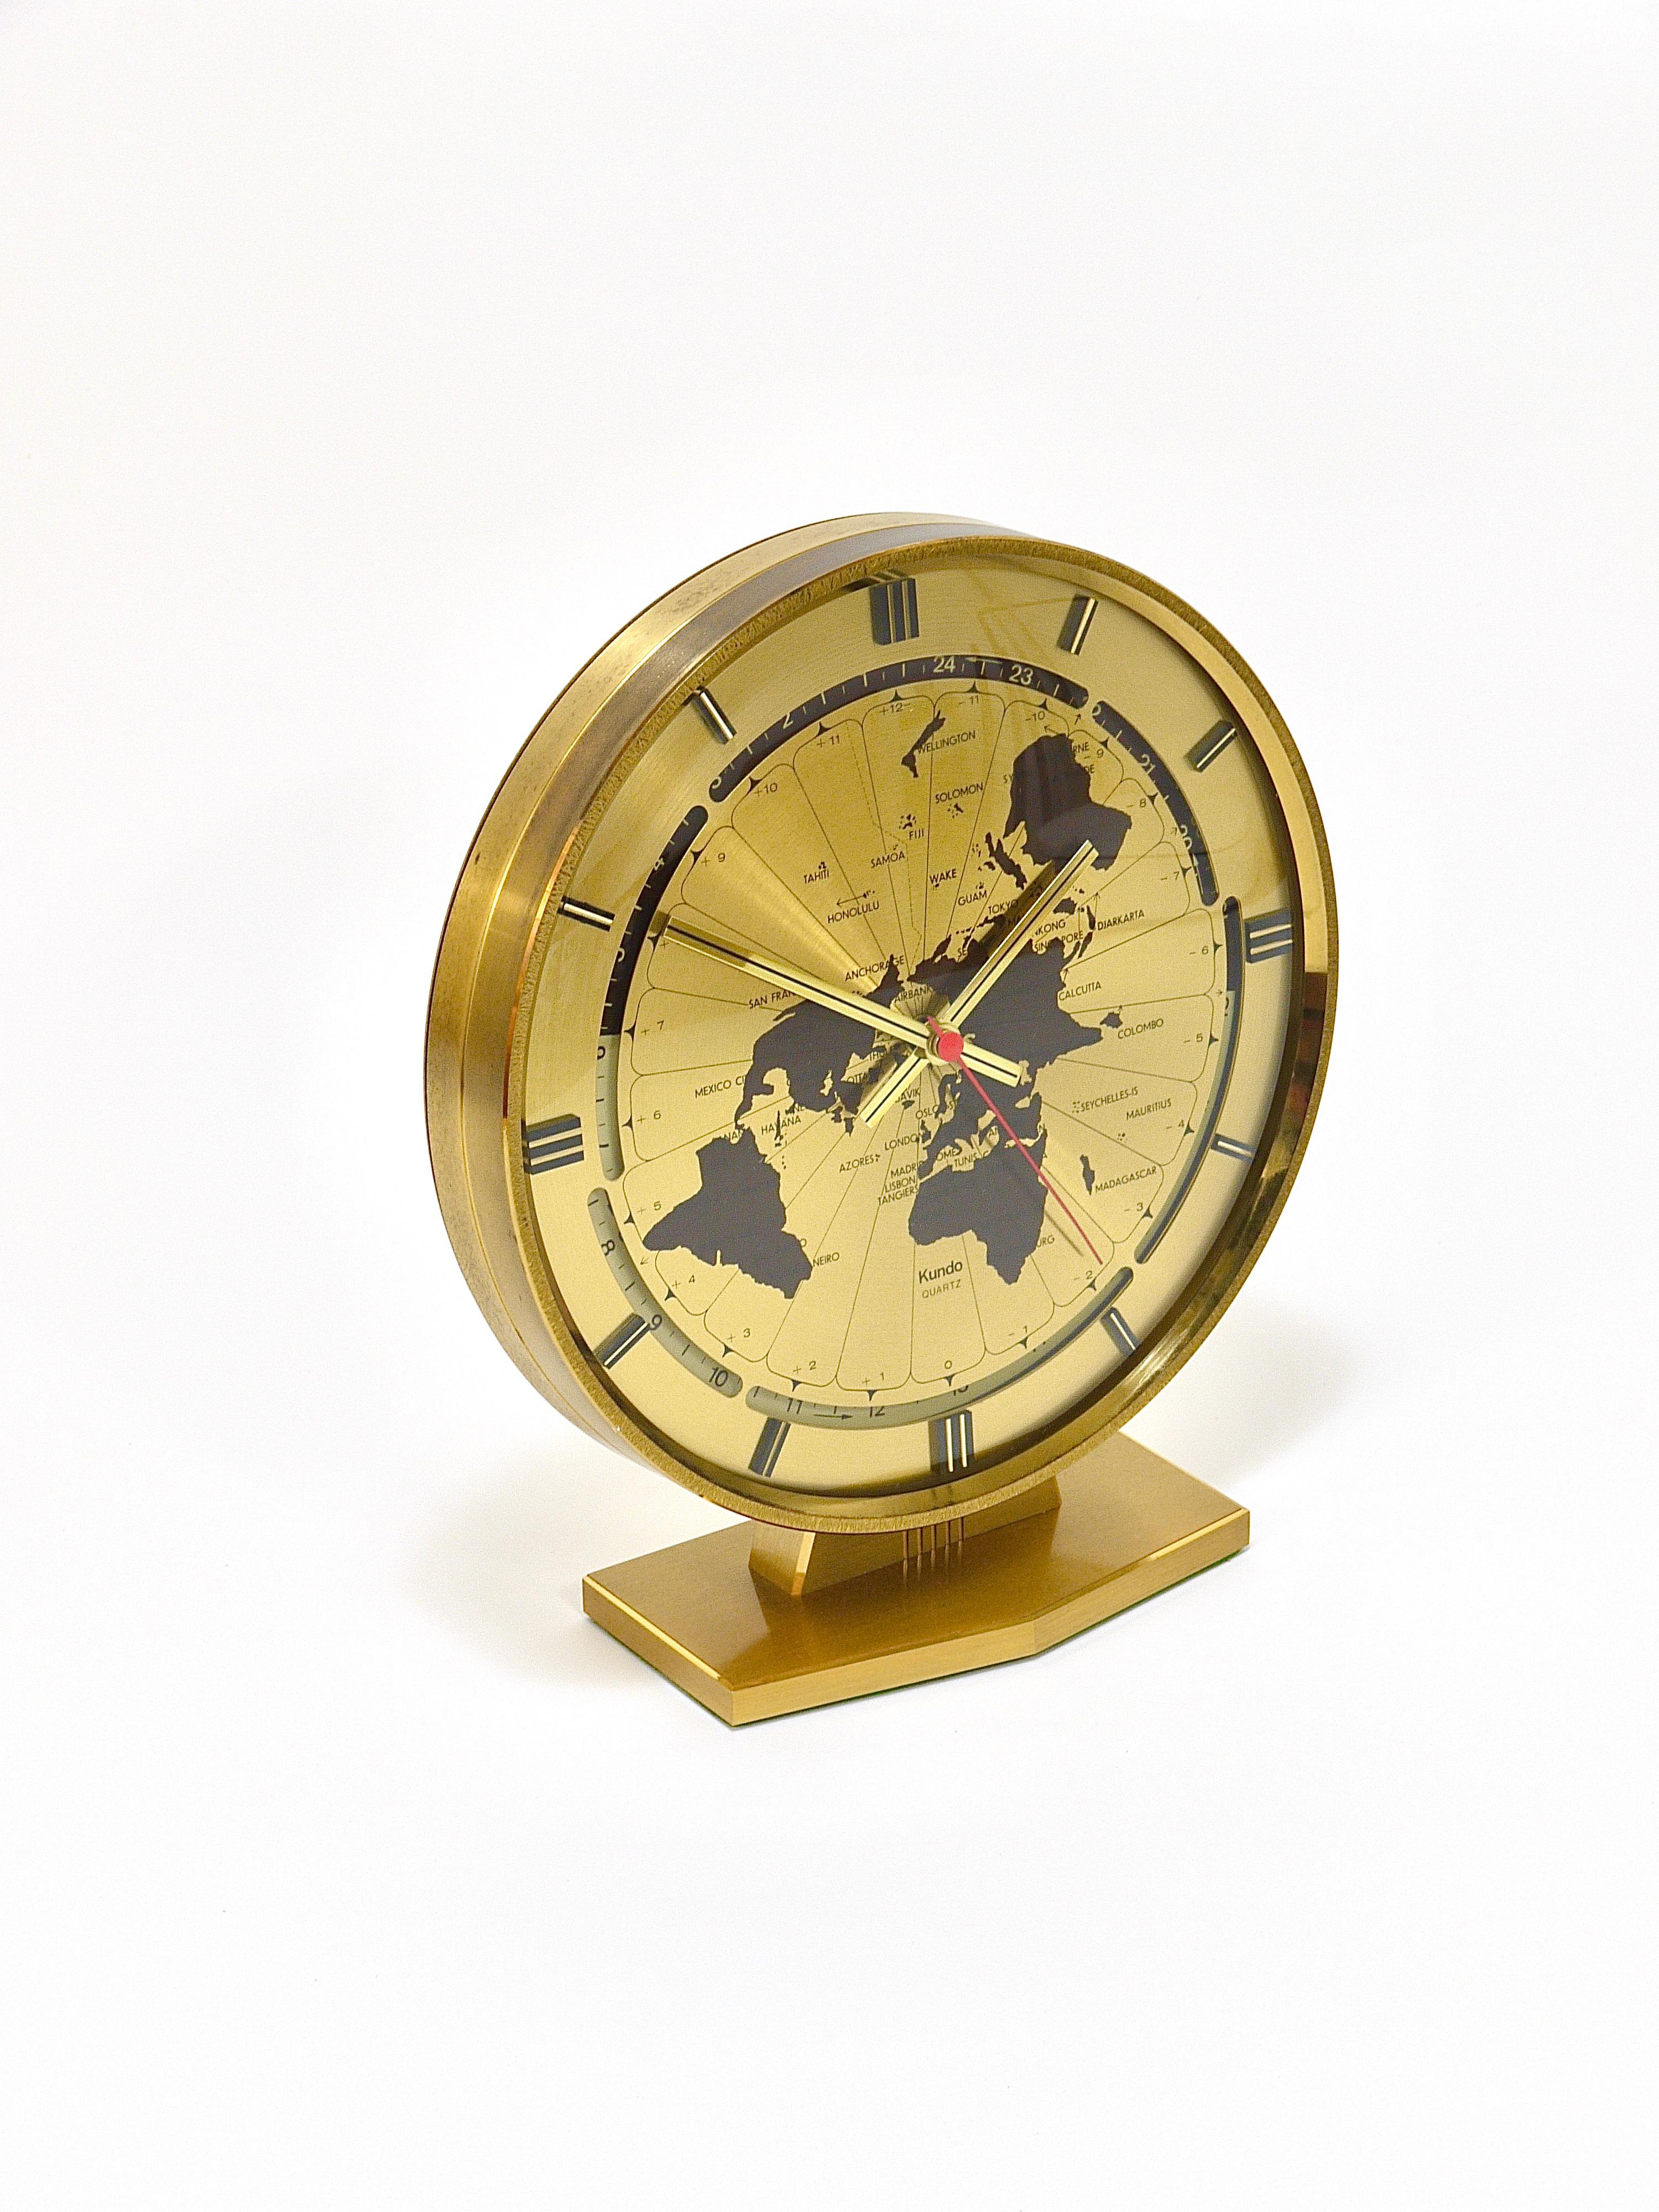 Large Kundo GMT World Time Zone Brass Table Clock, Kieninger & Obergfell, 1960s For Sale 4